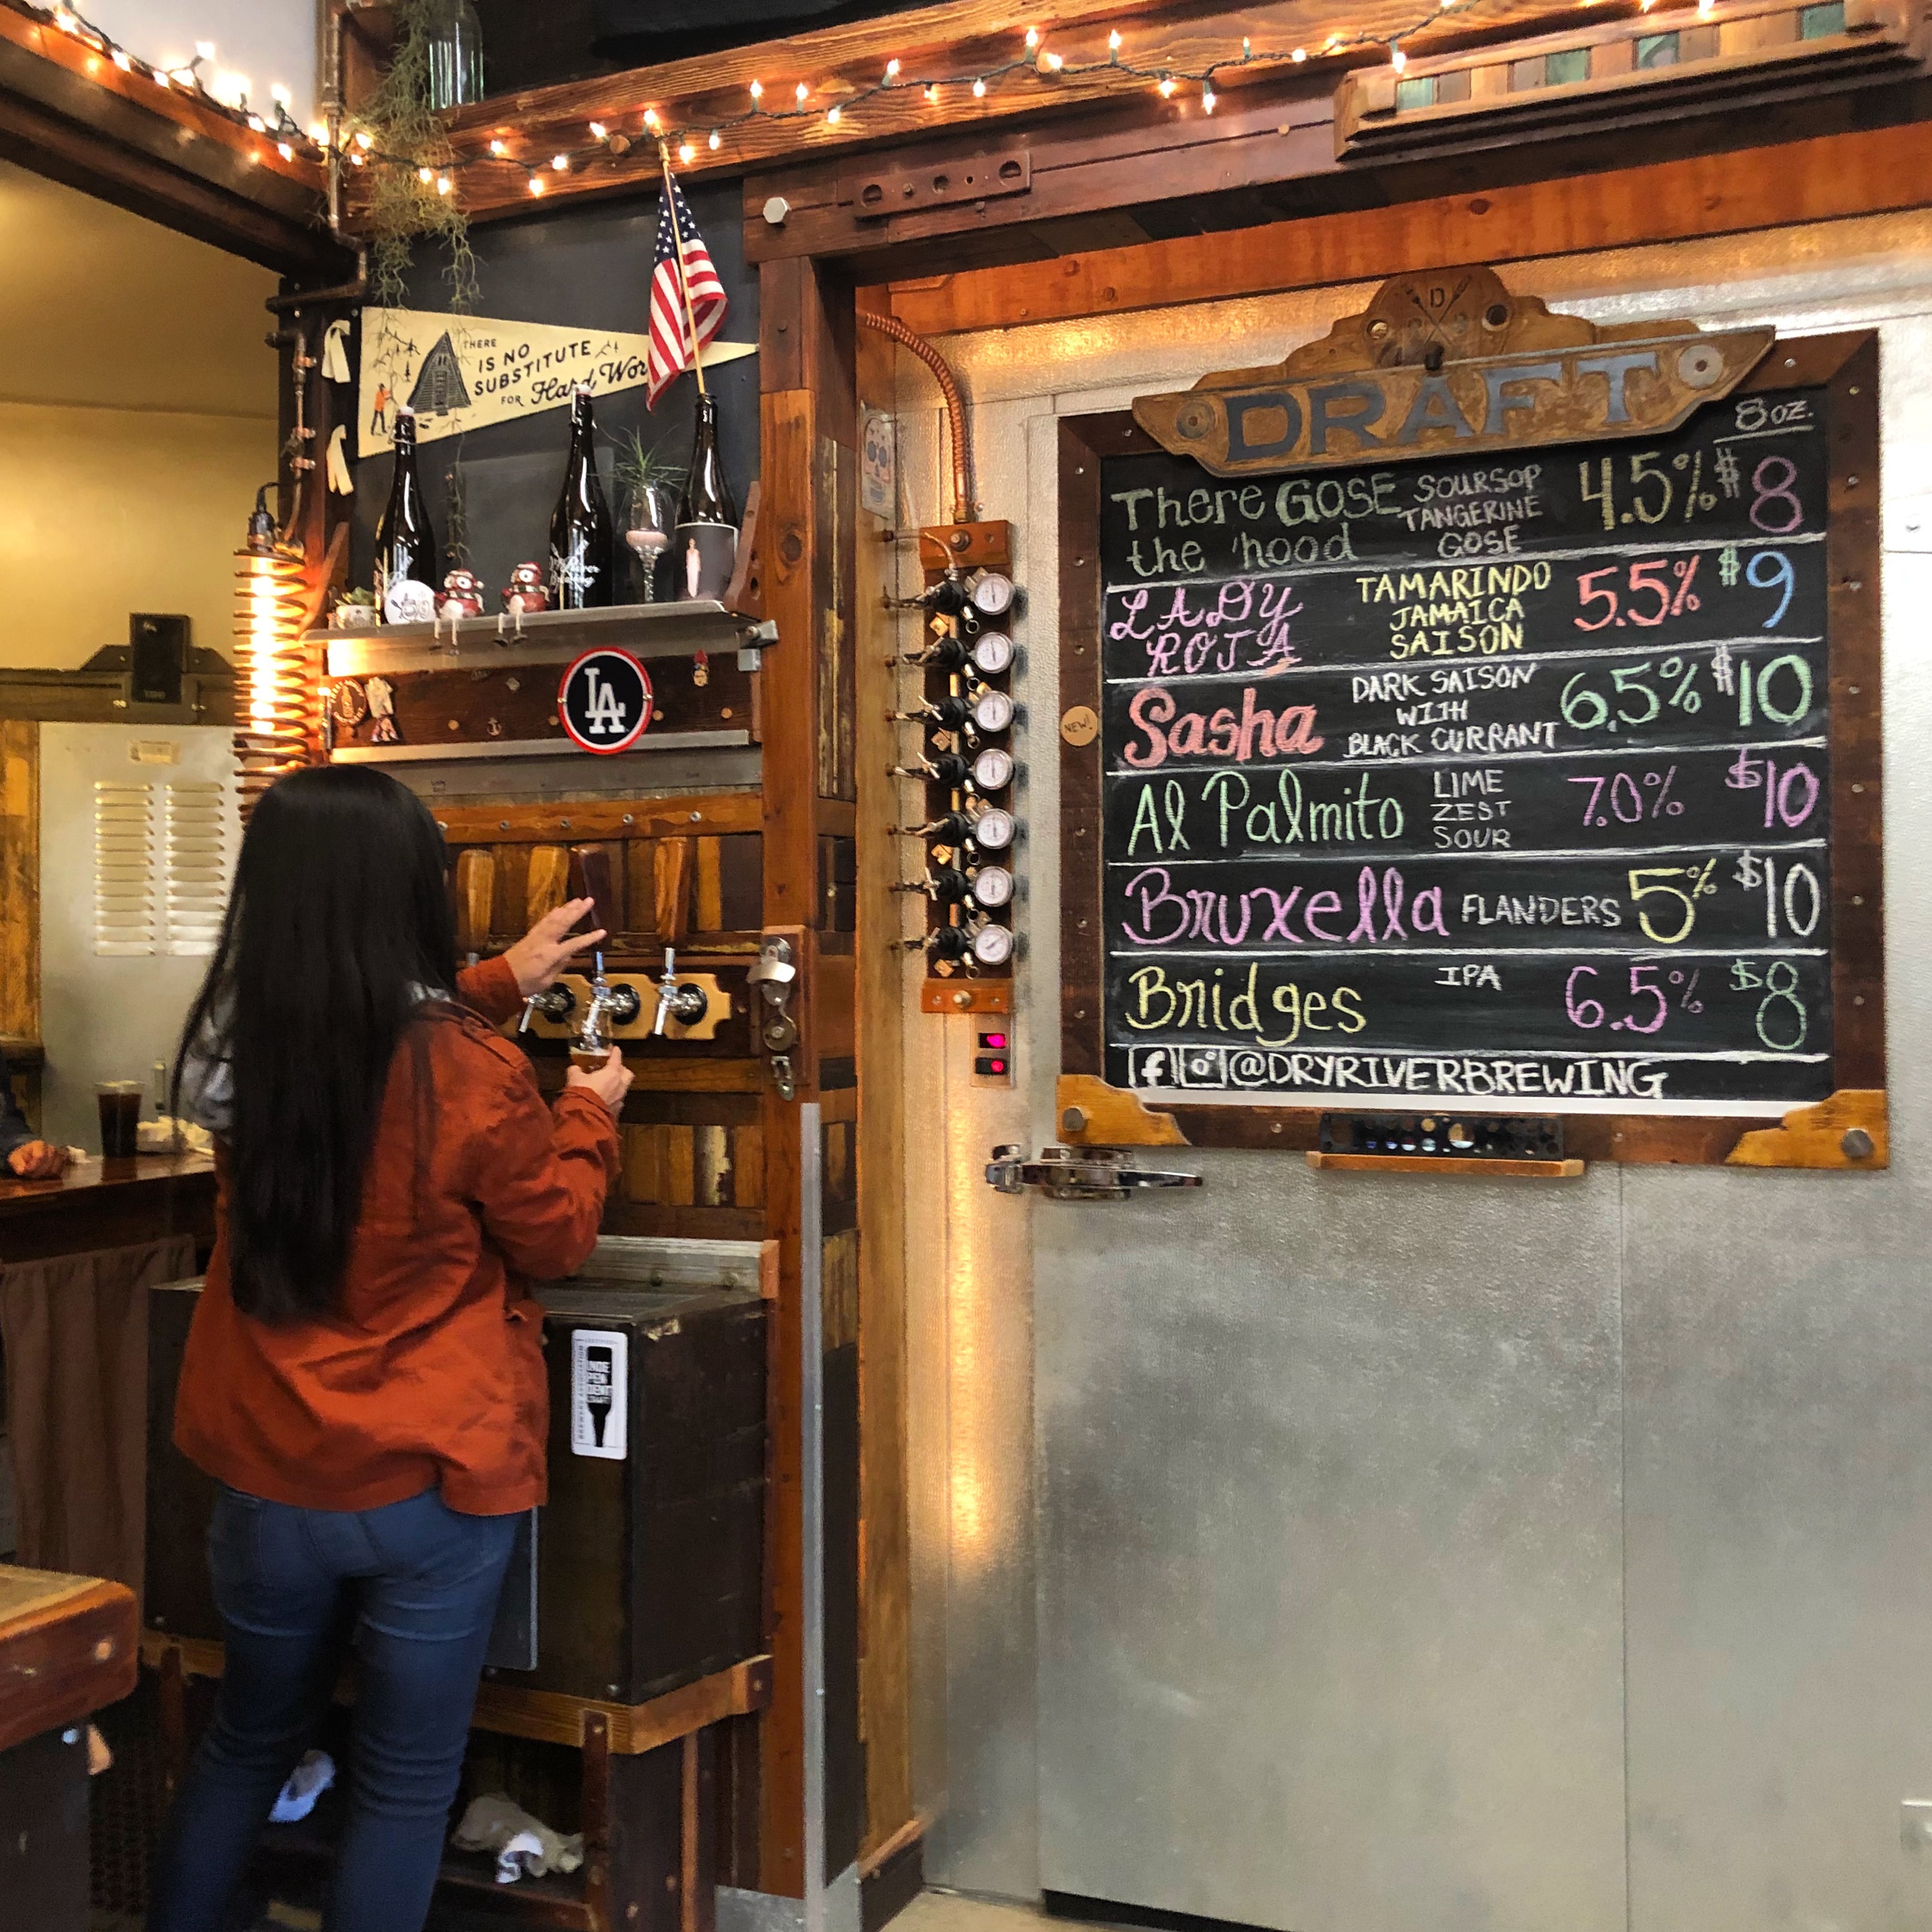 The tap list at Dry River Brewing in Los Angeles. This brewery brews on a 1 barrel system and puts out some great sour beers.